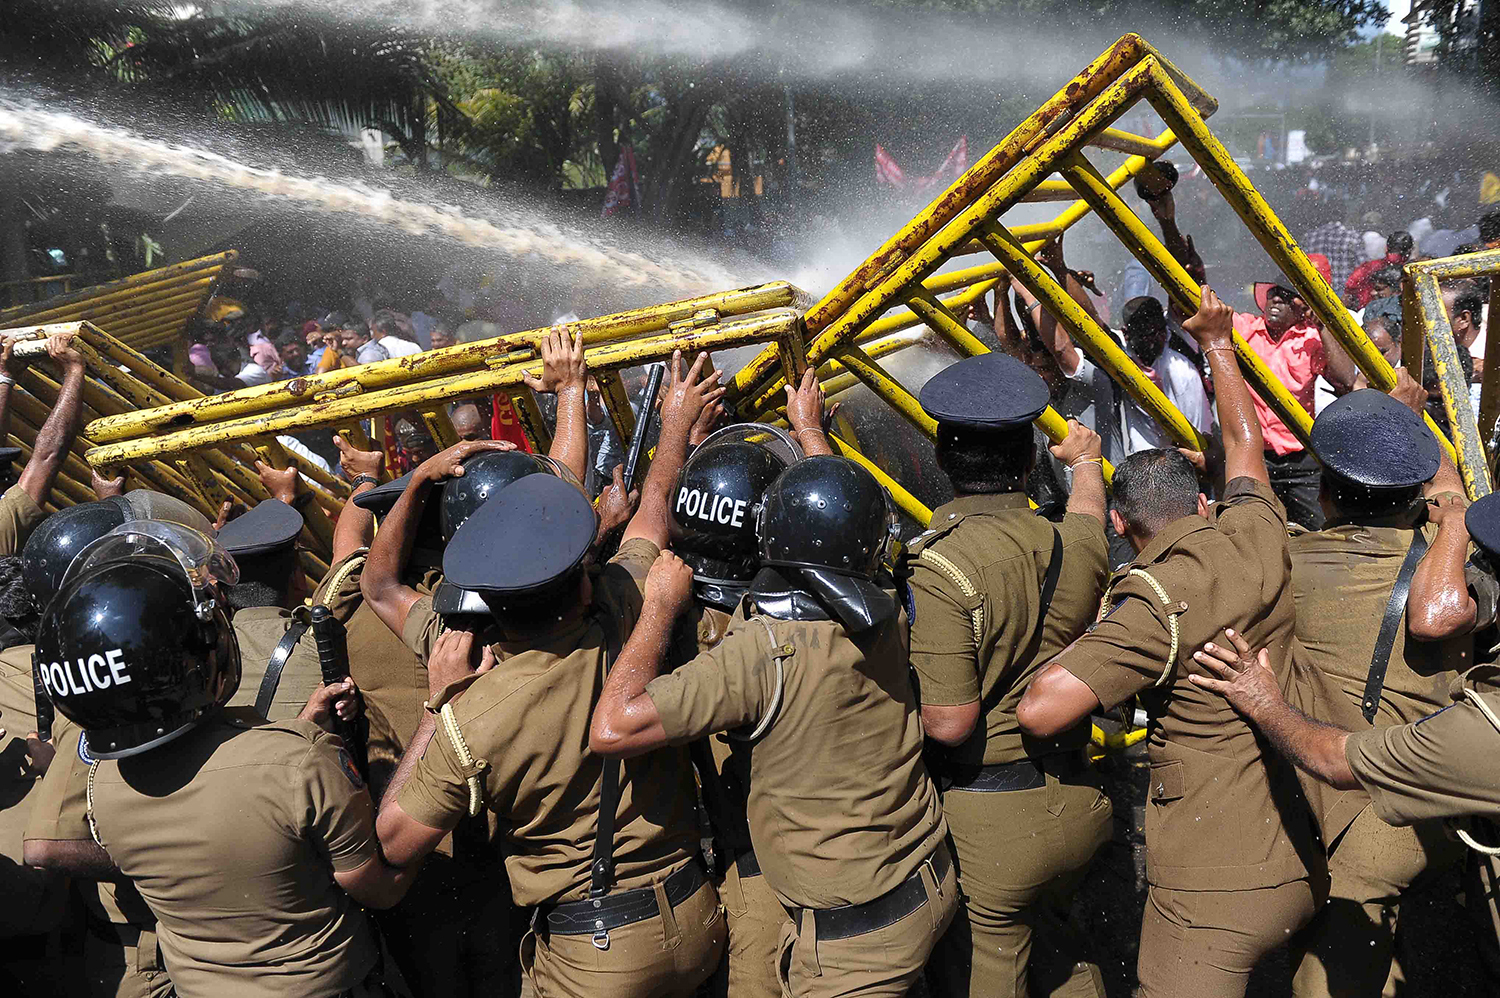 TOPSHOT - Sri Lankan police tryo to hold back demonstrators during a protest against the proposed sale of a stake in a loss-making port to a Chinese company in Colombo on February 1, 2017. Protesters led by the leftist People’s Liberation Front, are opposing plans to sell an 80 percent stake in the $1.4 billion deep sea port of Hambantota to China Merchants Port Holdings Company. / AFP PHOTO / Ishara S. KODIKARA / TT / kod 444